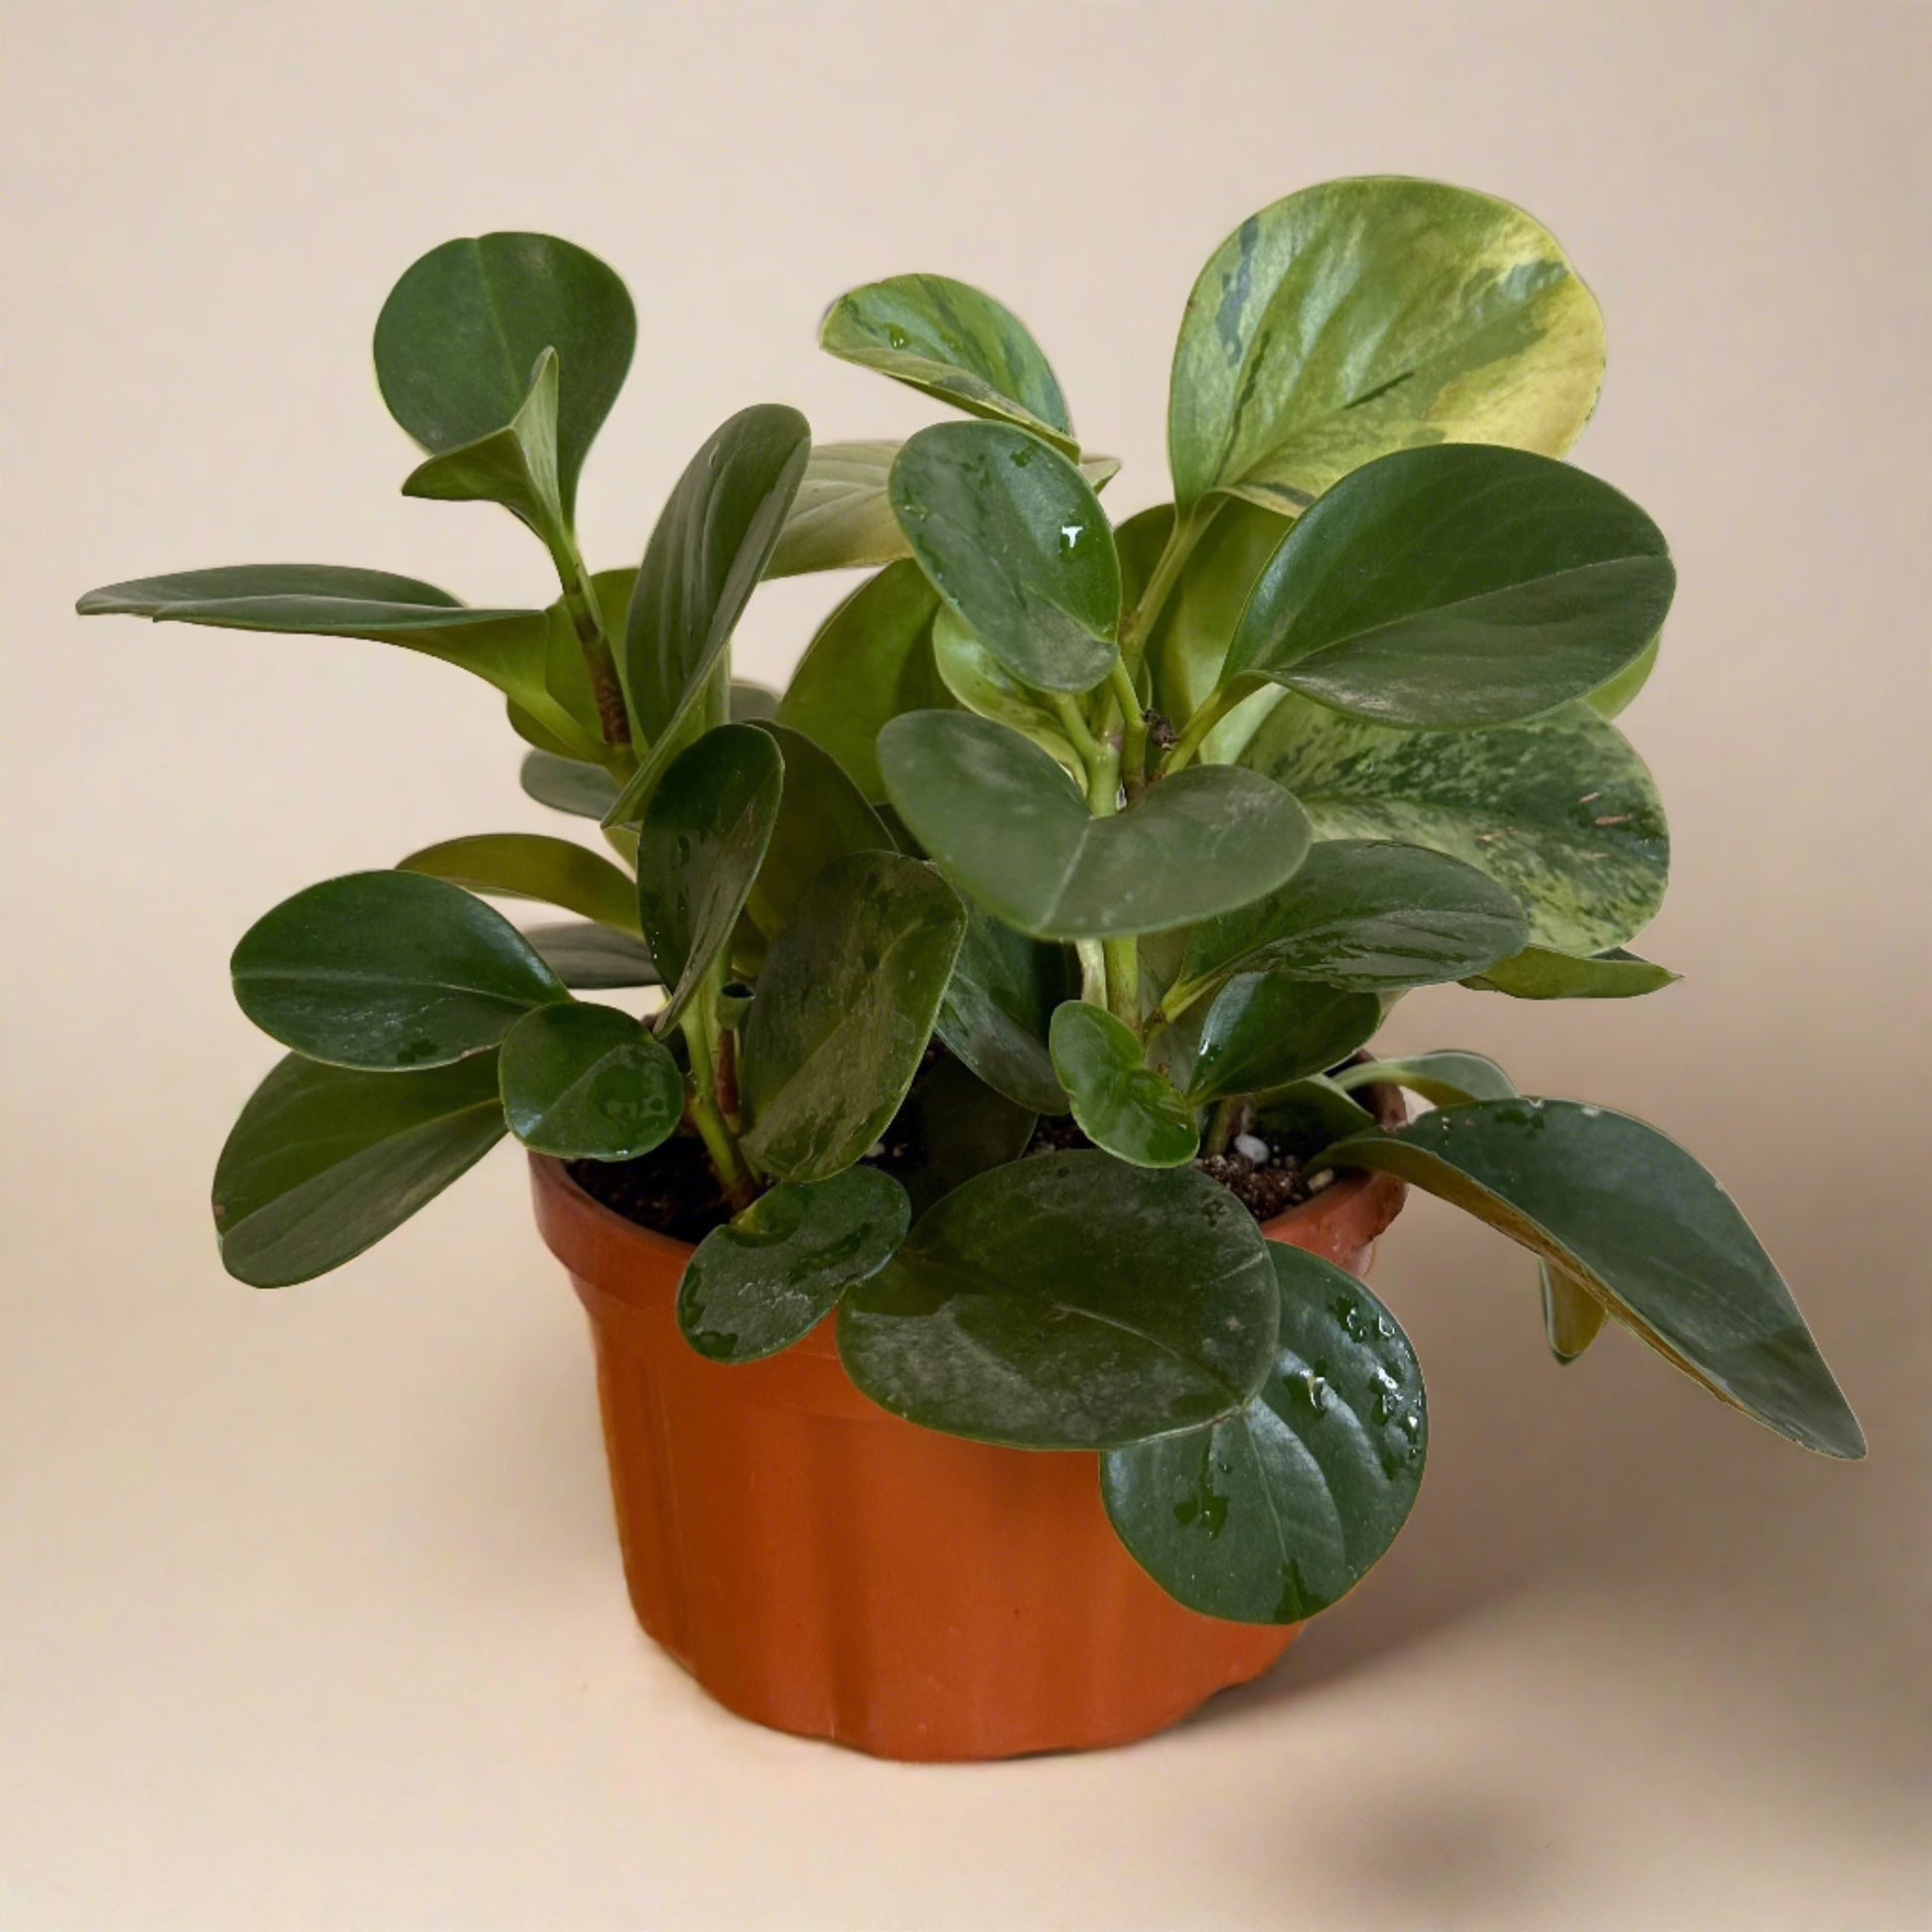 Green Baby Rubber PlantBaby Rubber Plant (Peperomia obtusifolia) - Available on Kaynuna.co in Cairo, Egypt